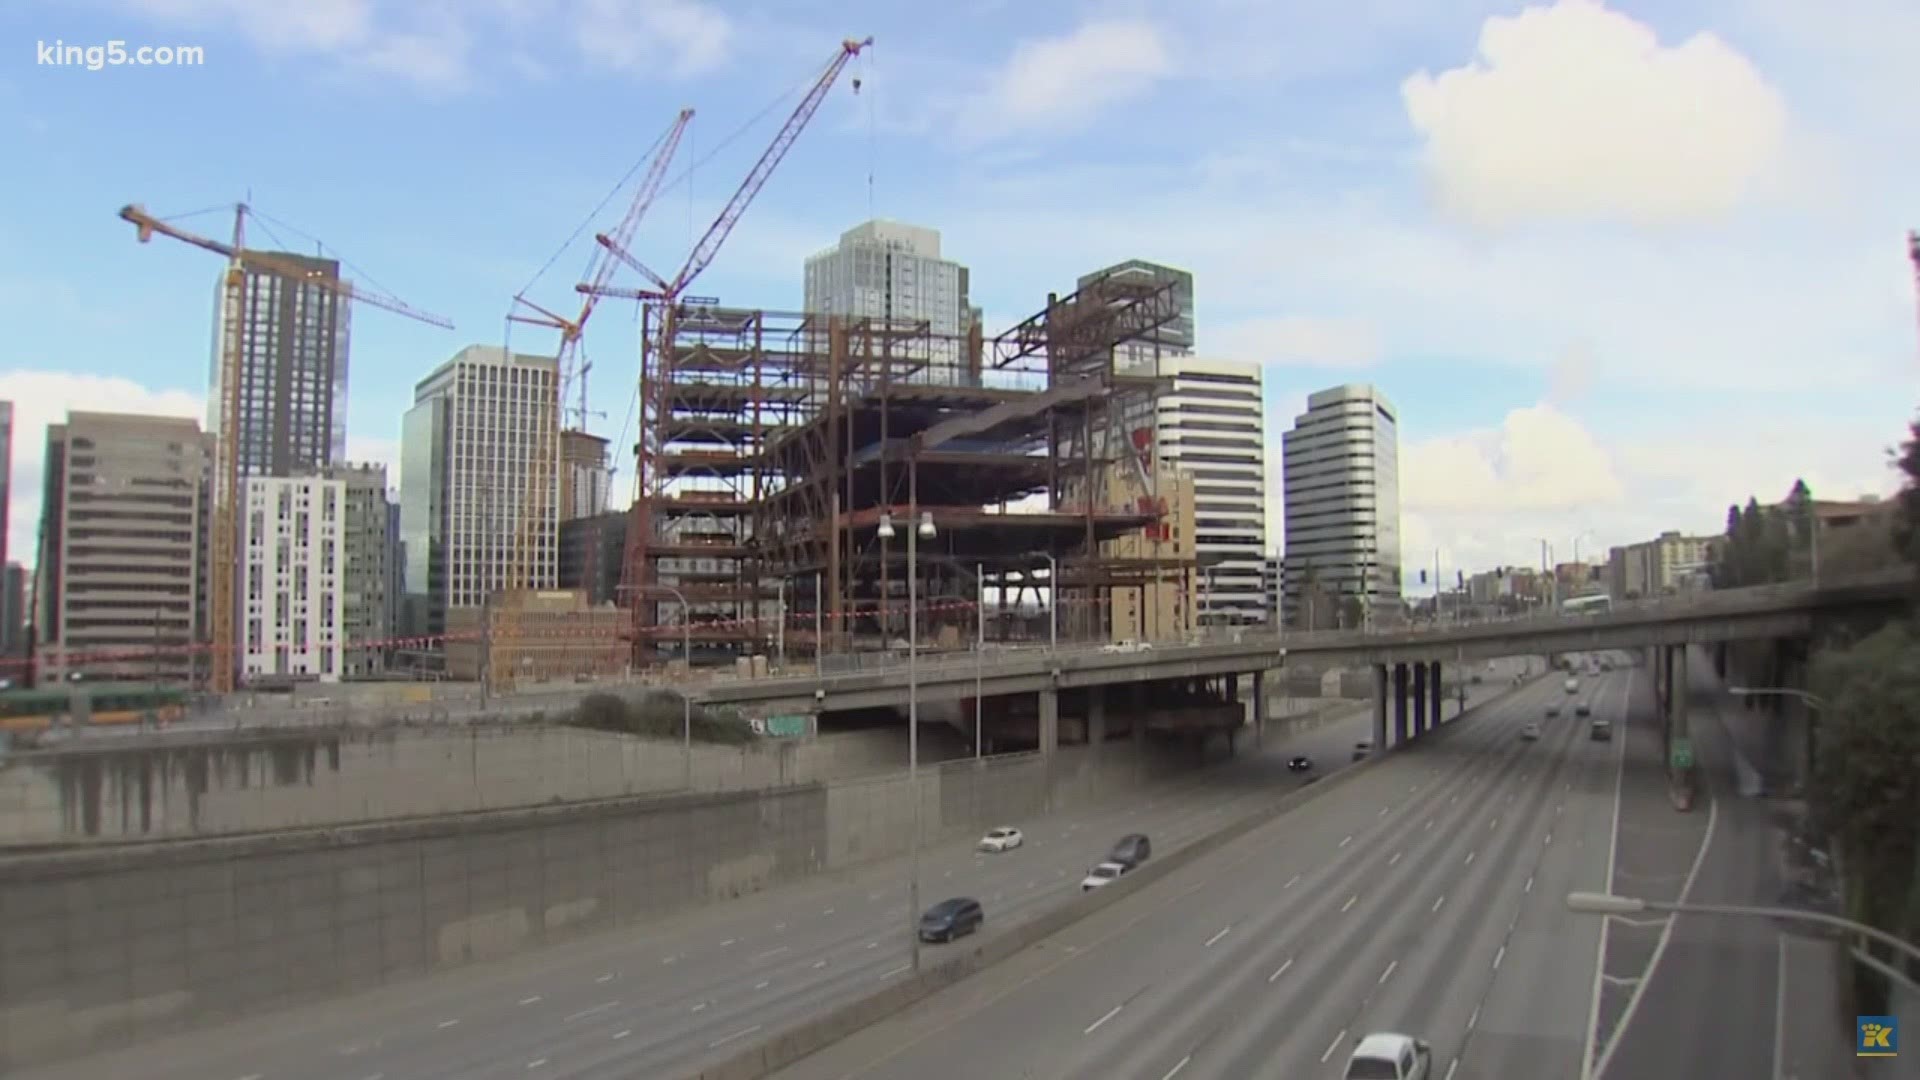 The nearly $2 billion project in downtown Seattle has been hampered by the sudden drop in hotel revenues last year, which were being used to pay for the expansion.